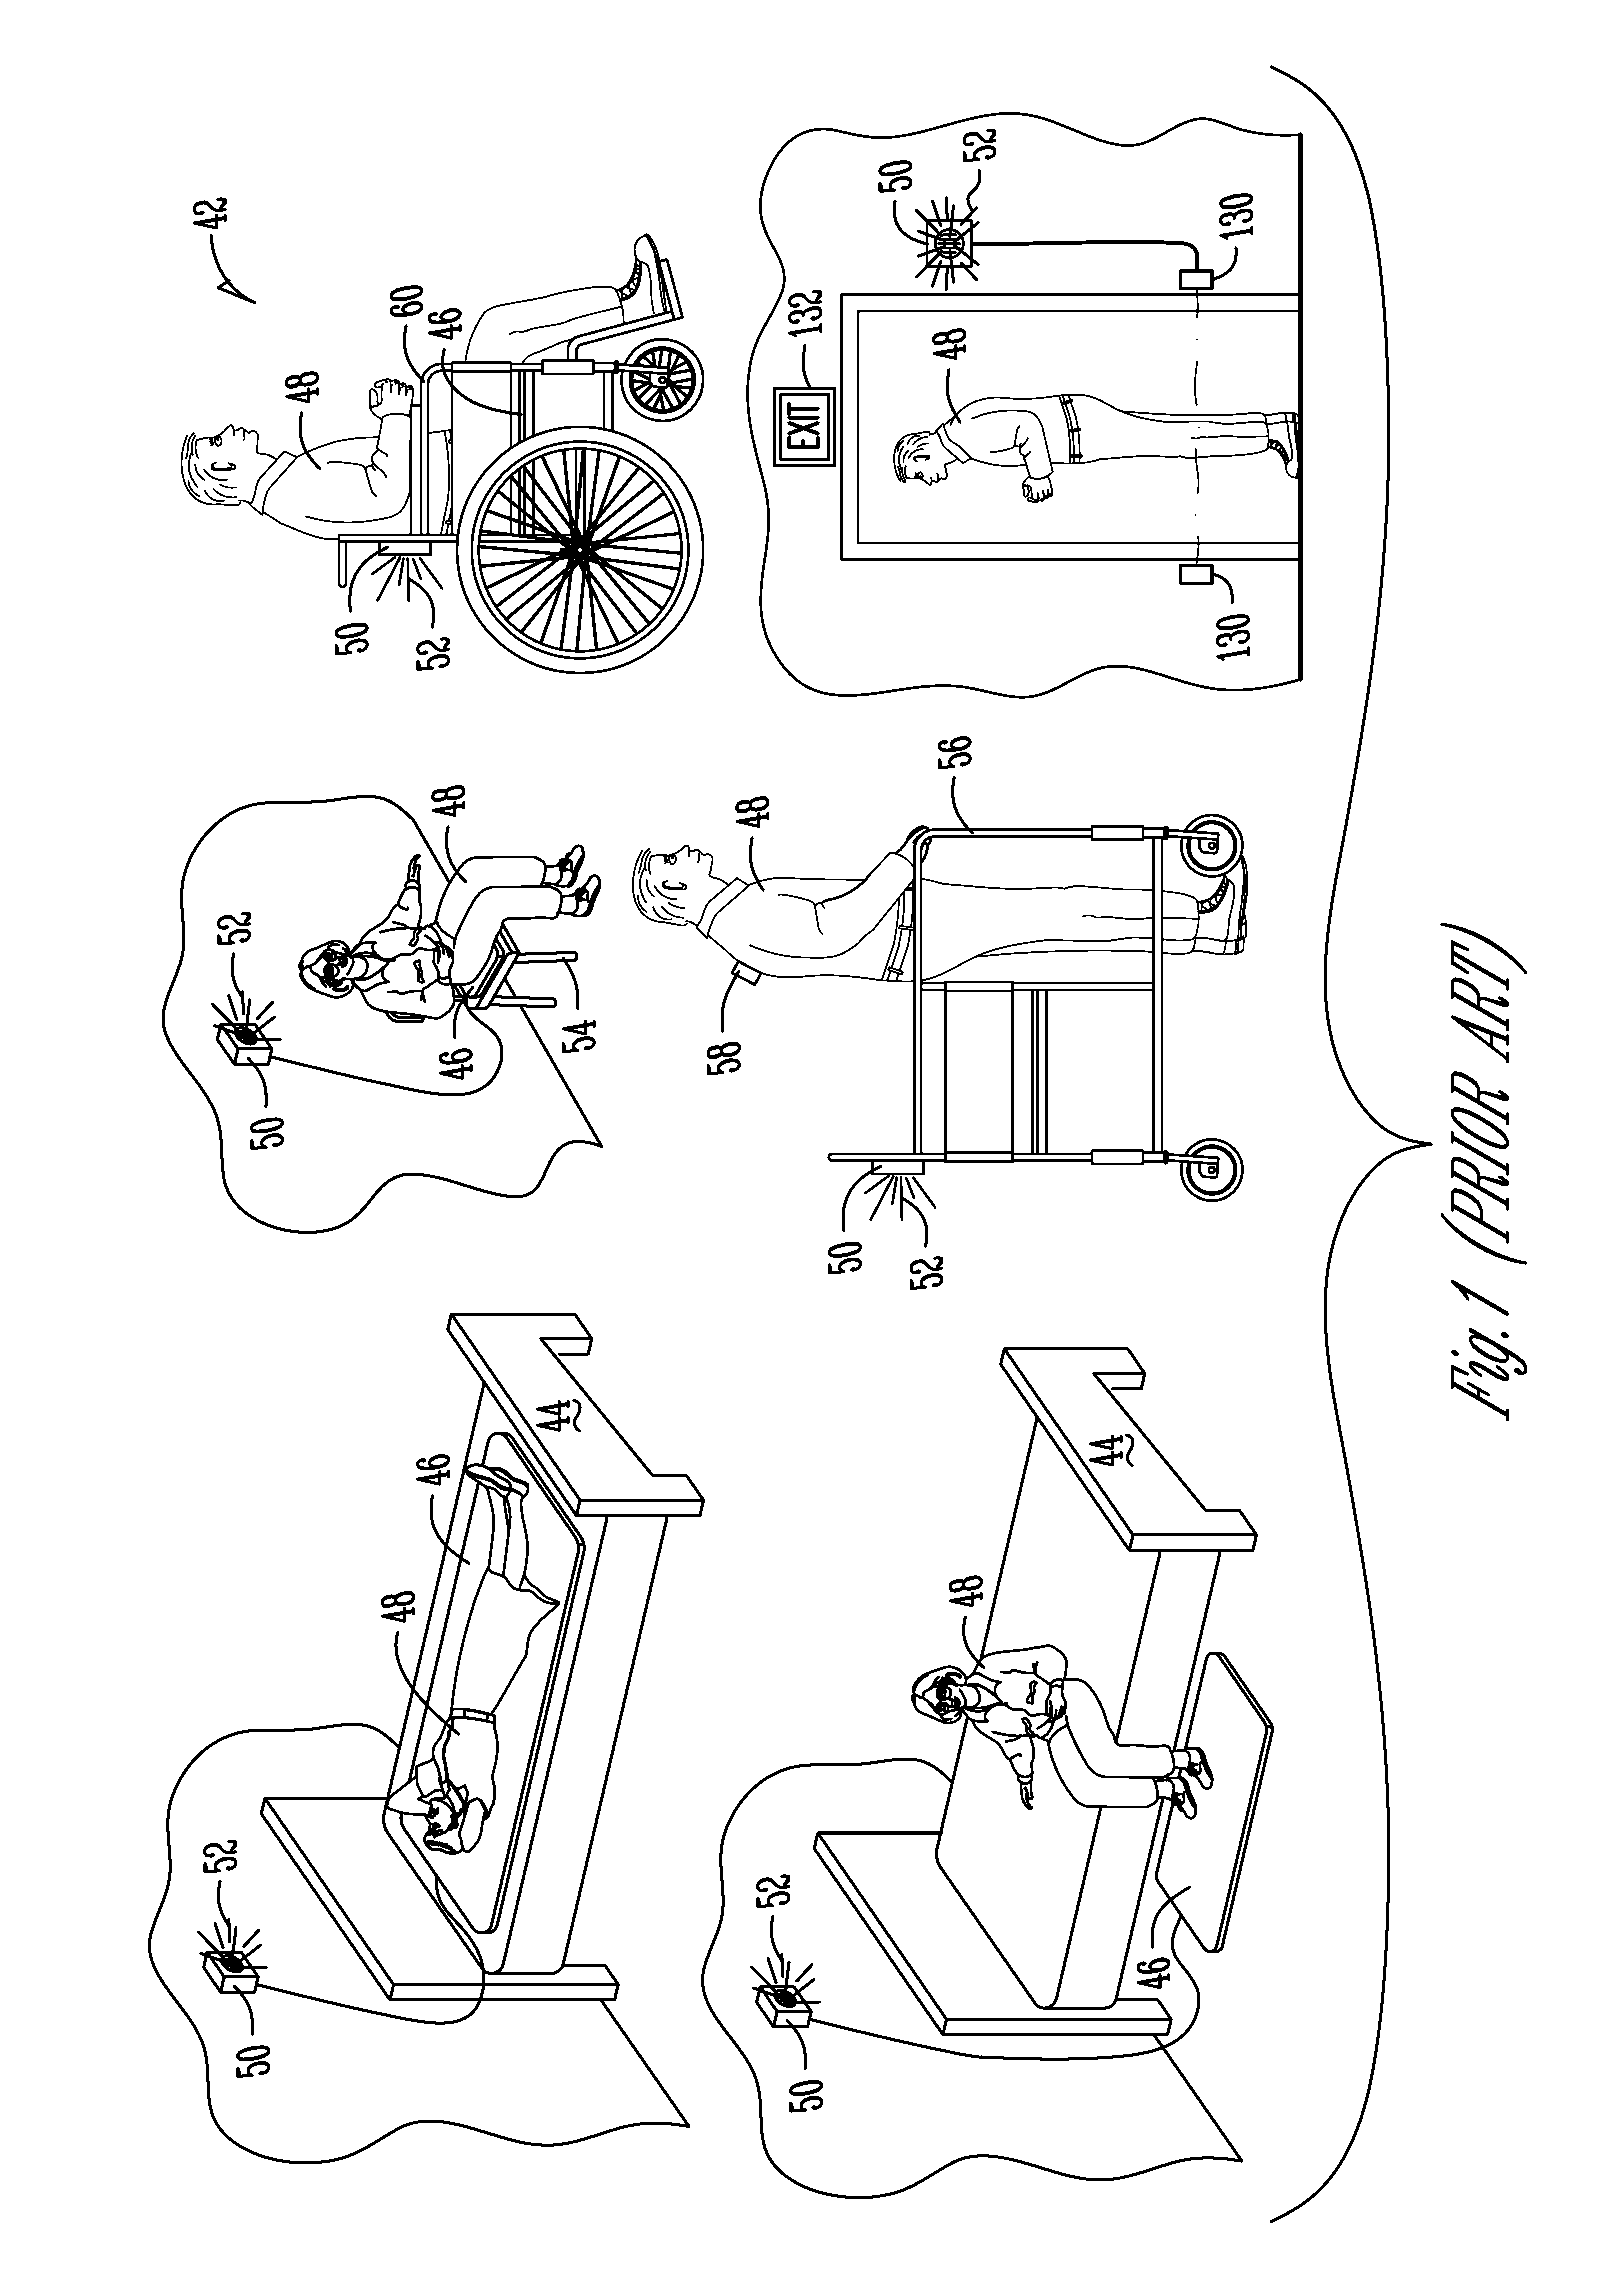 Medical device and method for preventing falls